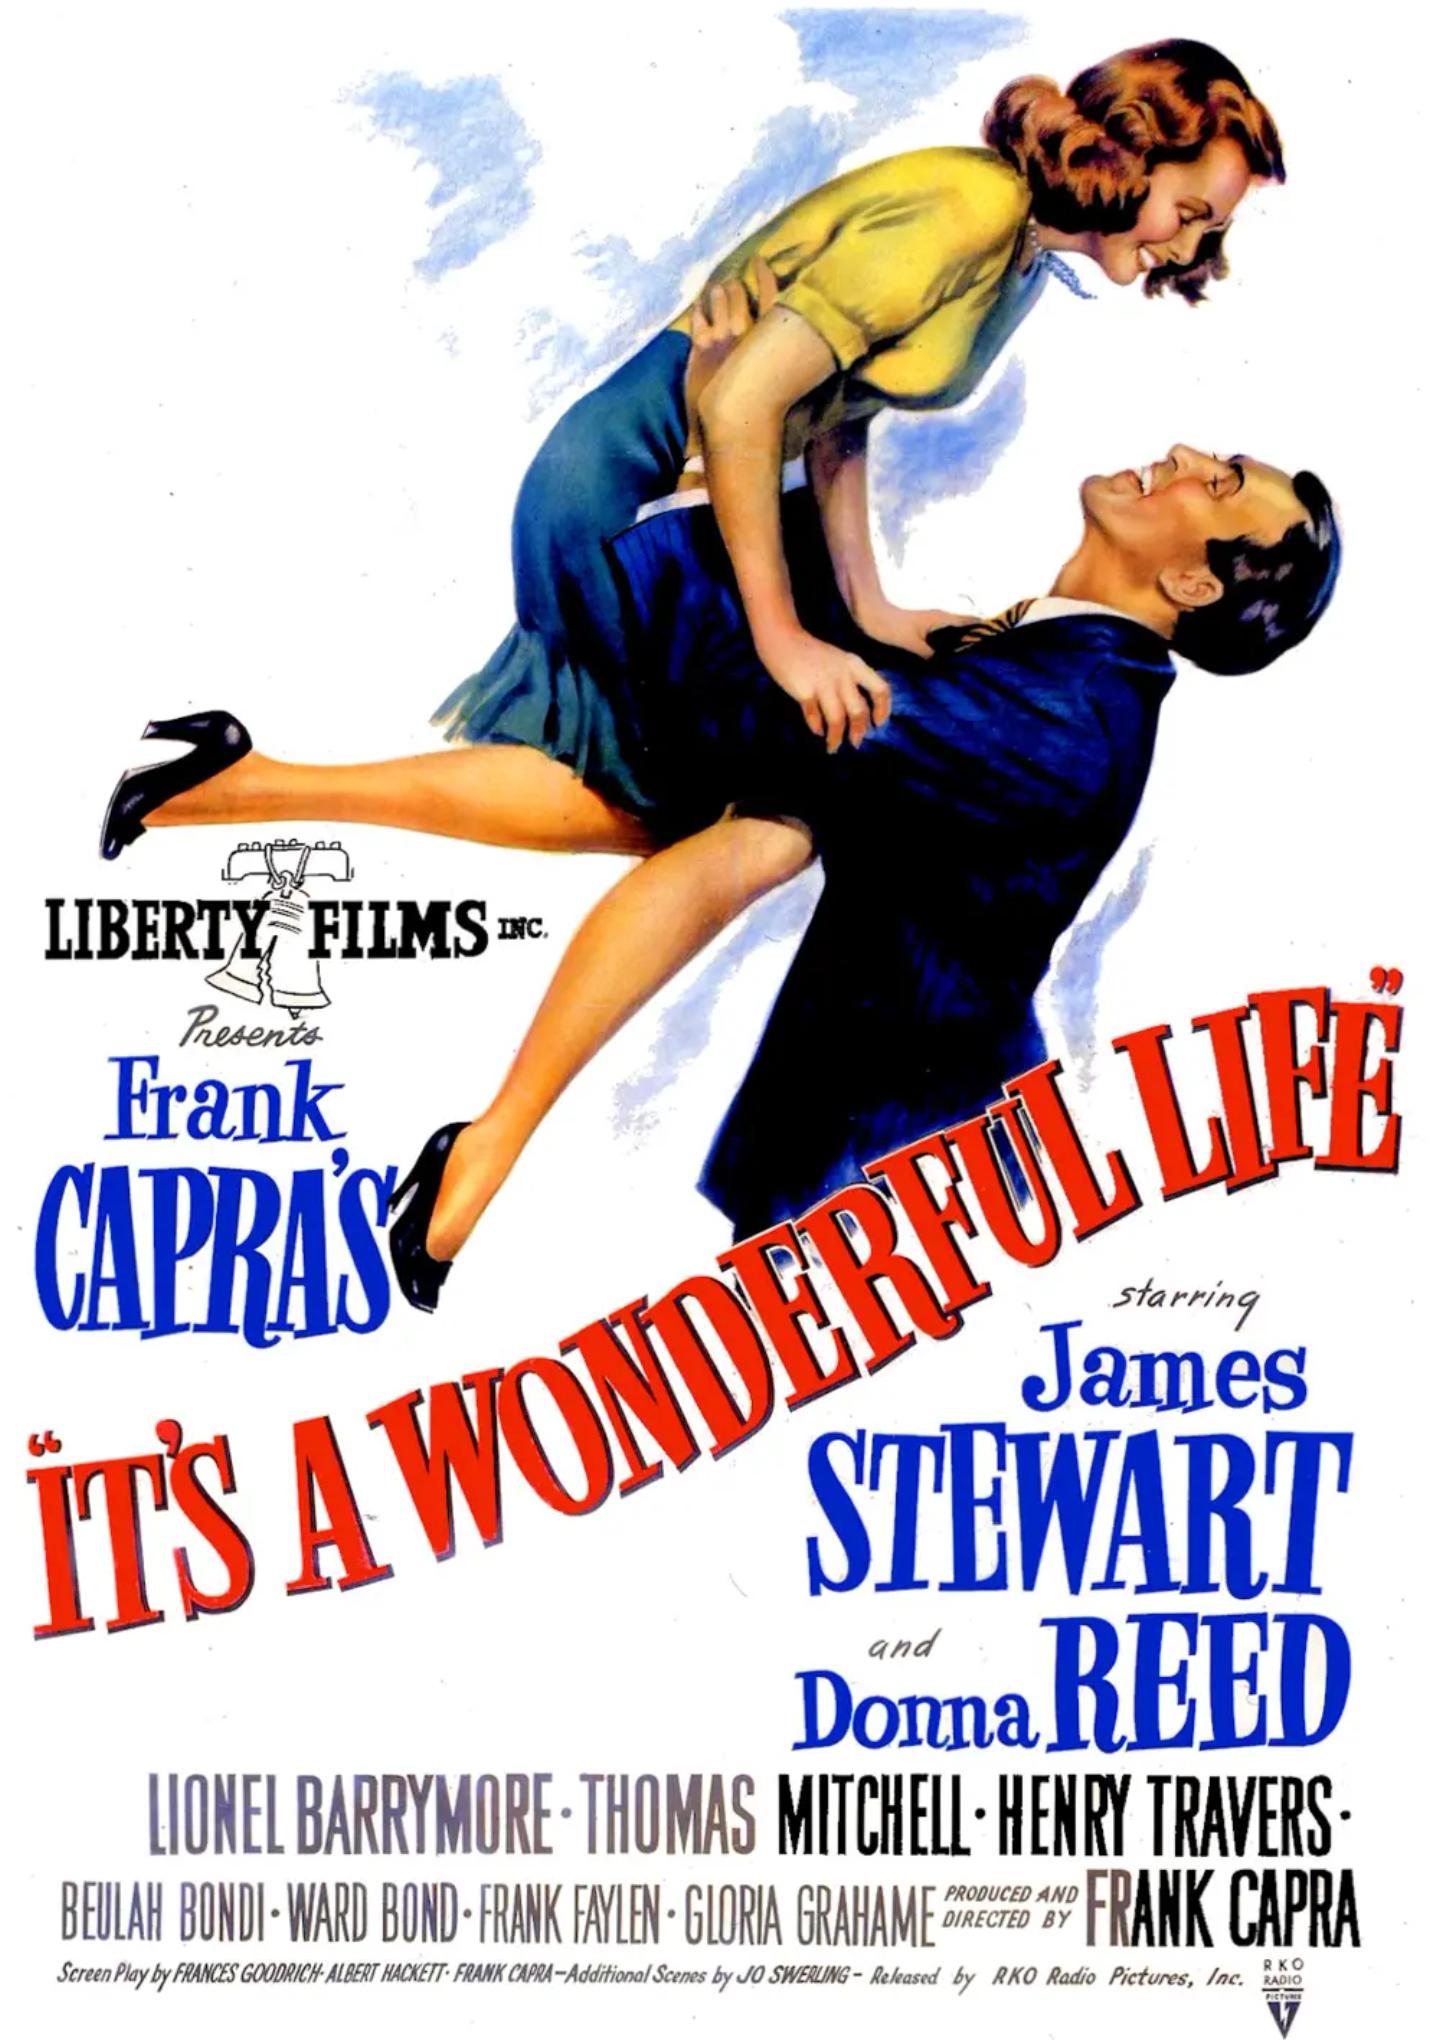 Plakat for 'It's a Wonderful Life'